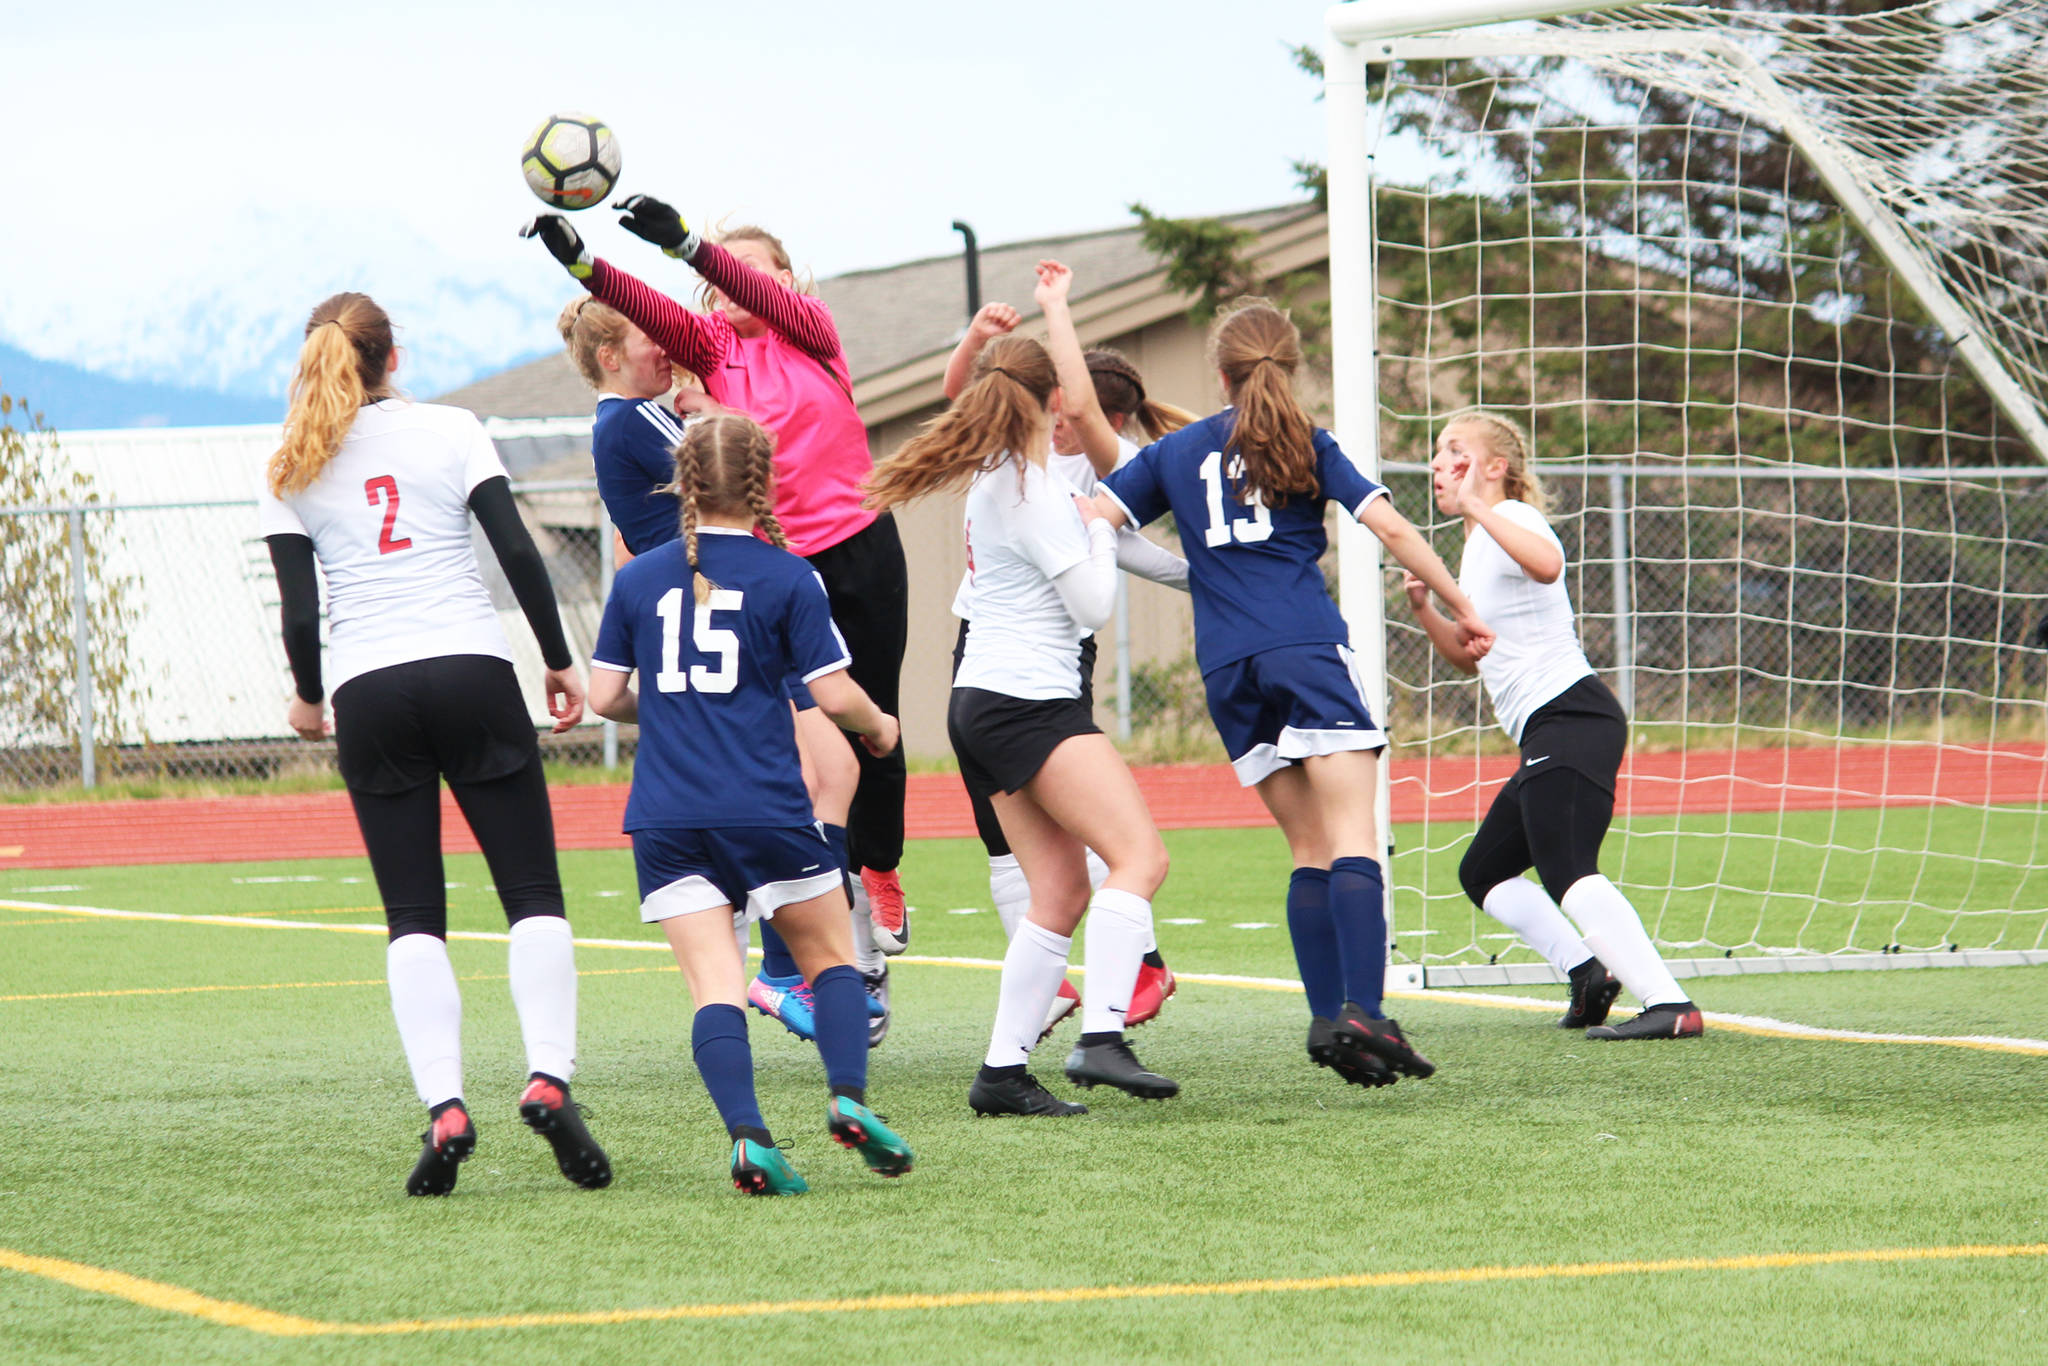 Kenai goal keeper Kailey Hamilton knocks the ball out of a pack of players during a Thursday, May 9, 2019 soccer game at Homer High School in Homer, Alaska. (Photo by Megan Pacer/Homer News)